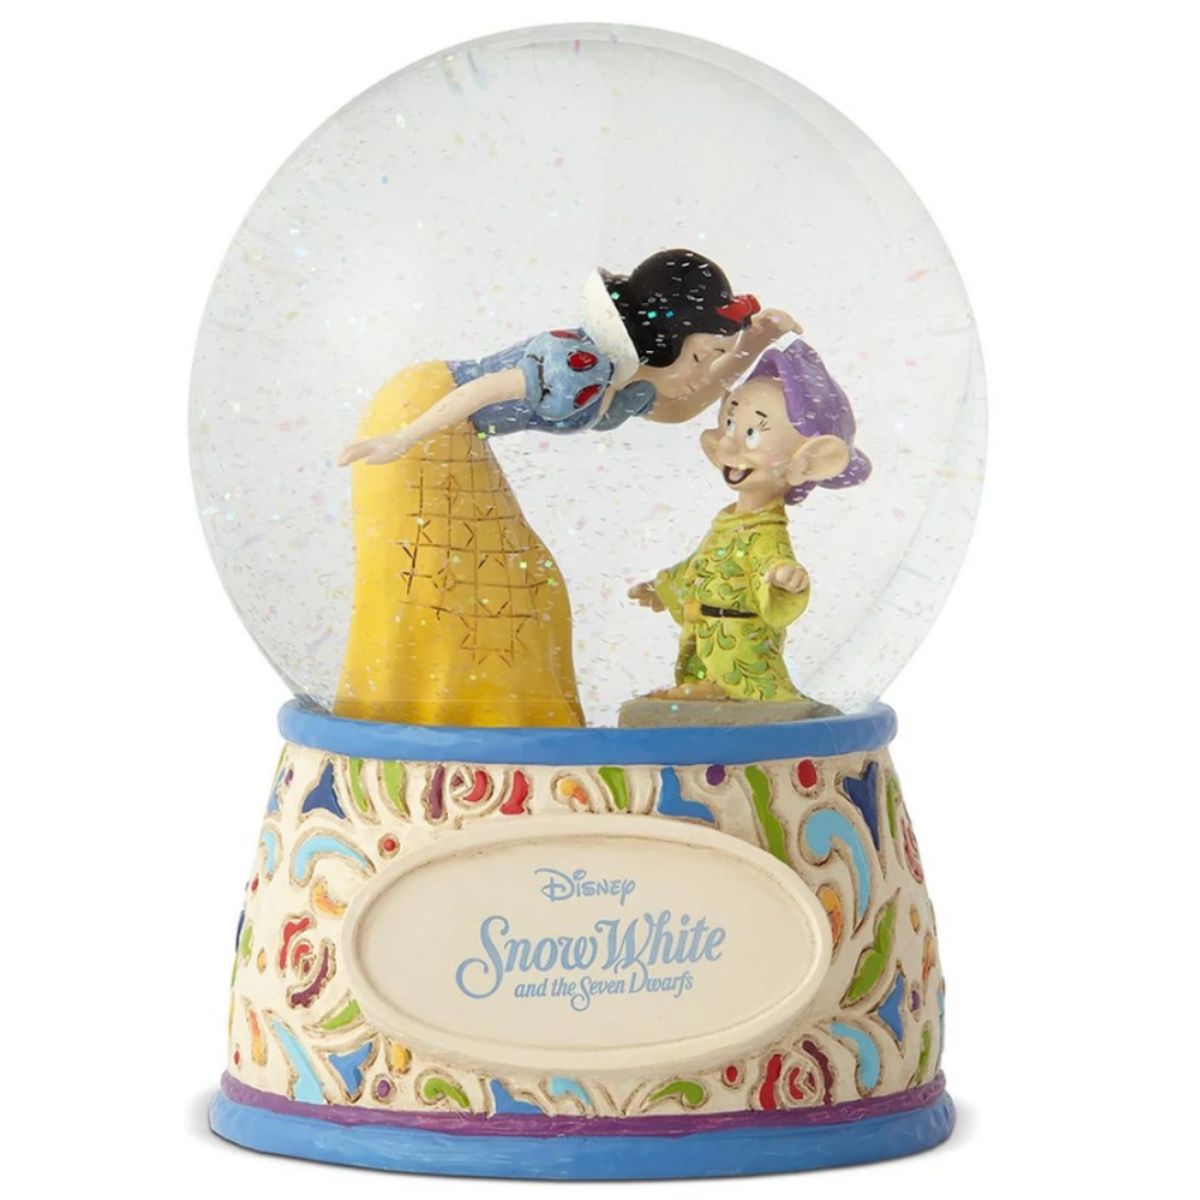 Sweetest Farewell - Snow White Waterball